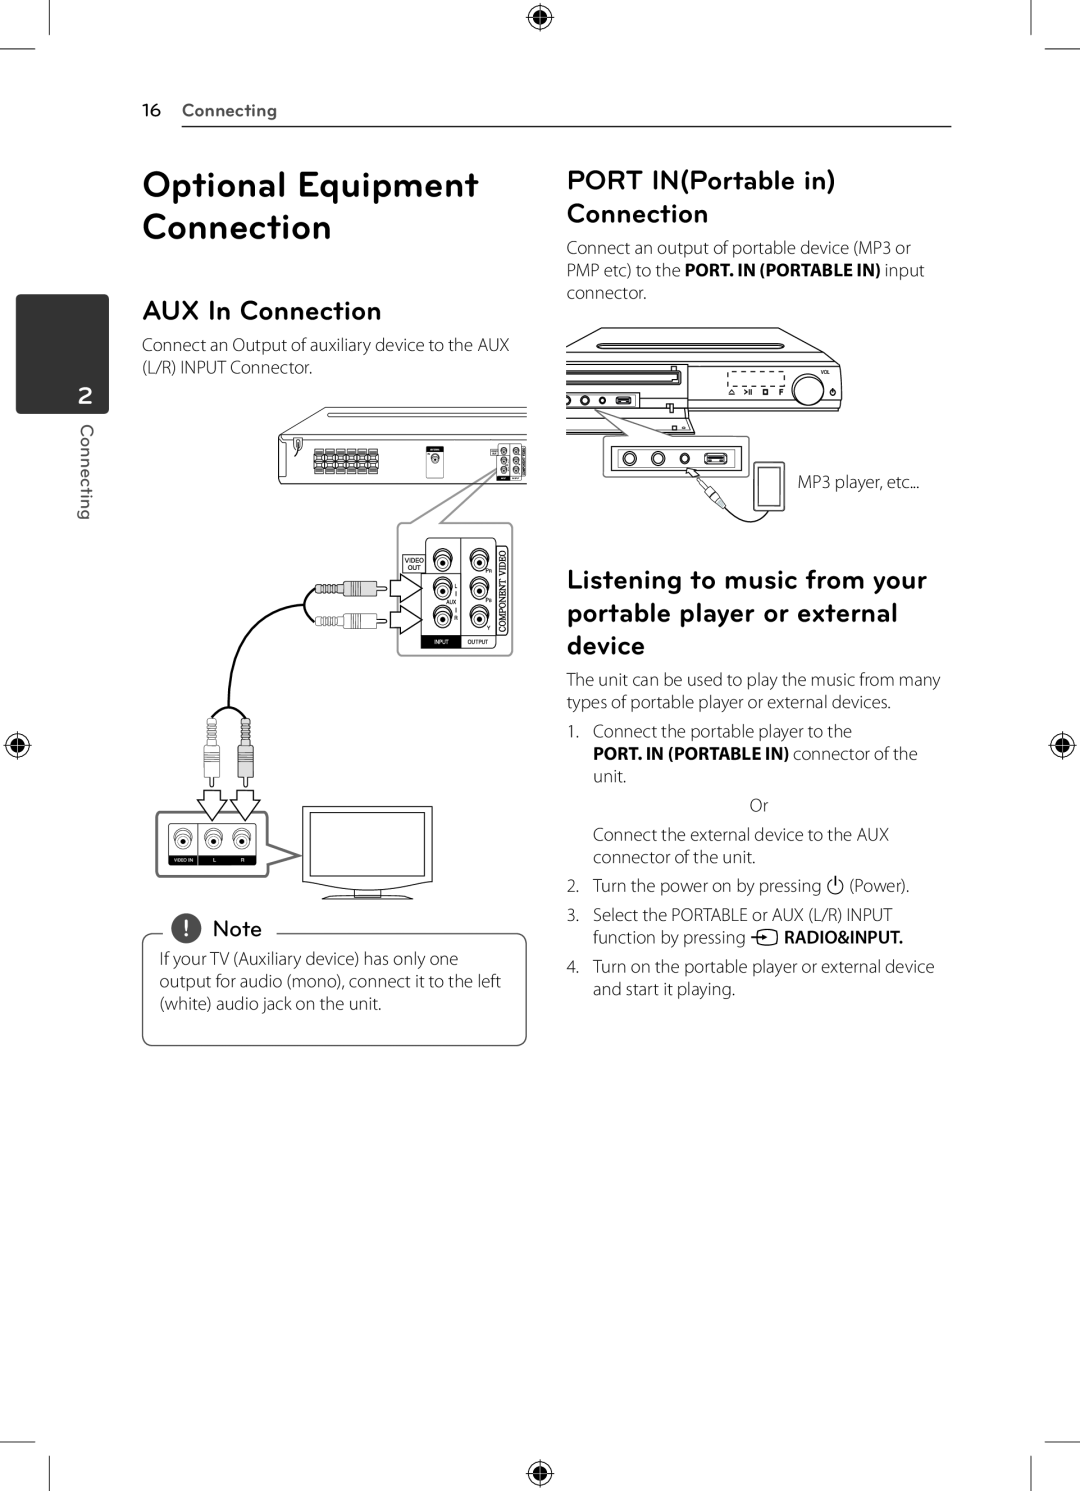 LG Electronics DH4220S AUX In Connection, PORT INPortable in Connection, Connecting, Optional Equipment Connection 